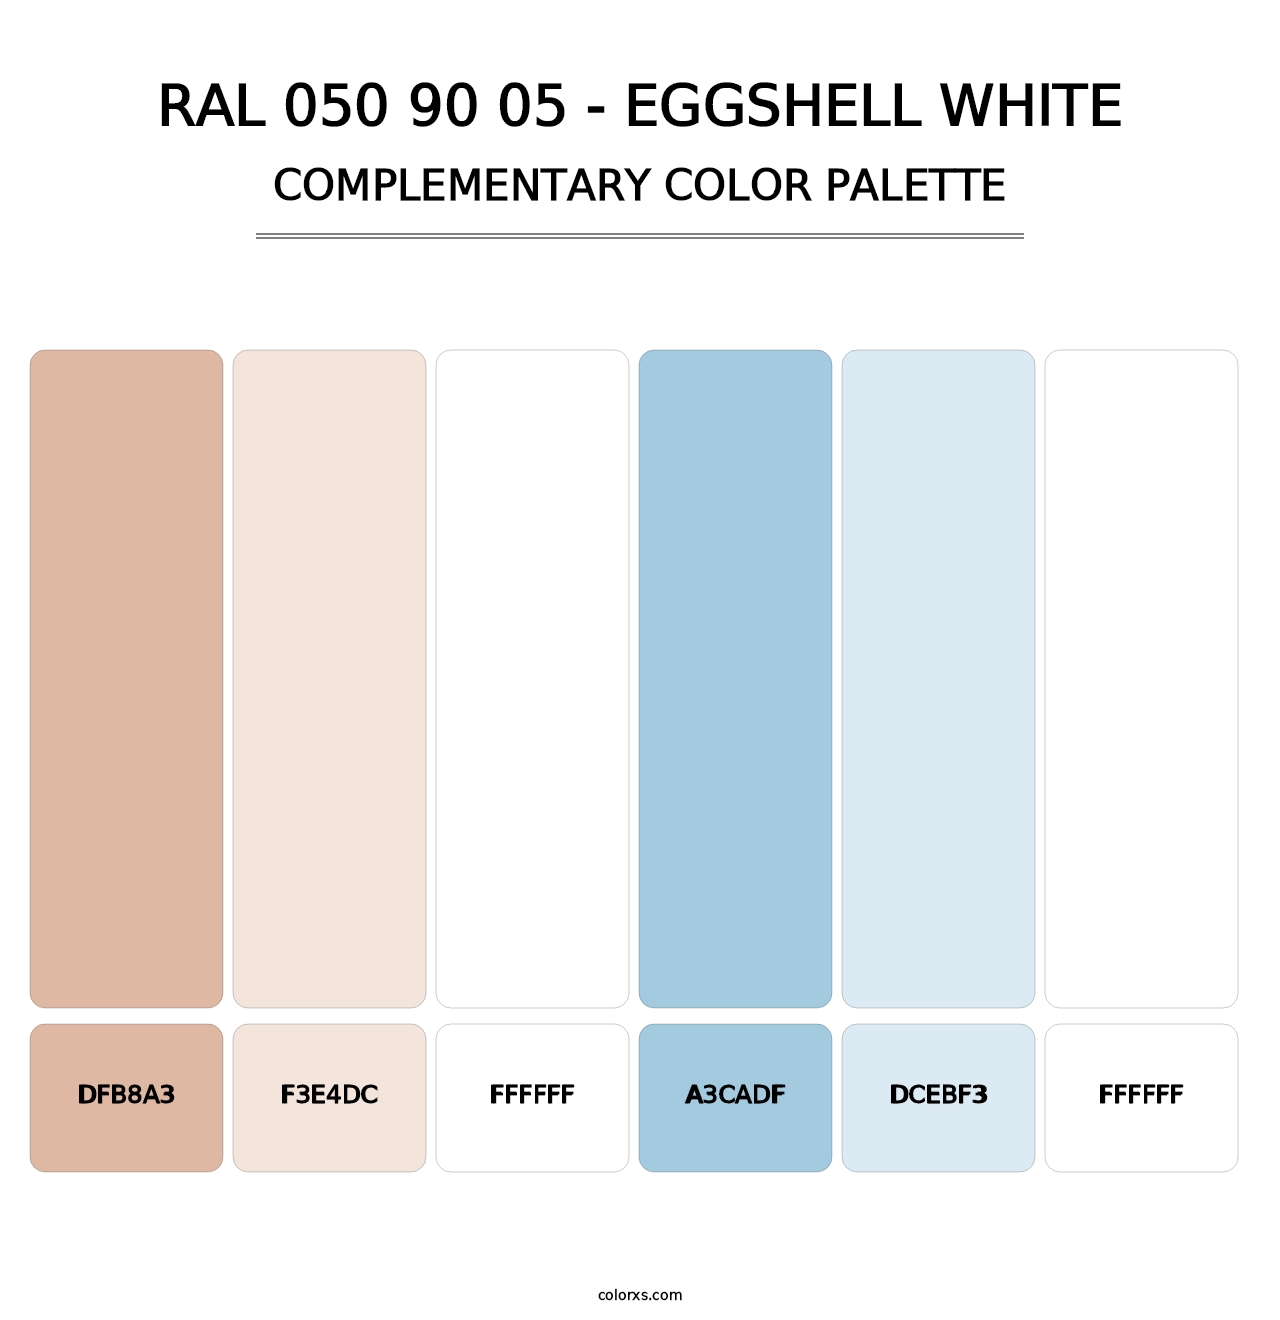 RAL 050 90 05 - Eggshell White - Complementary Color Palette